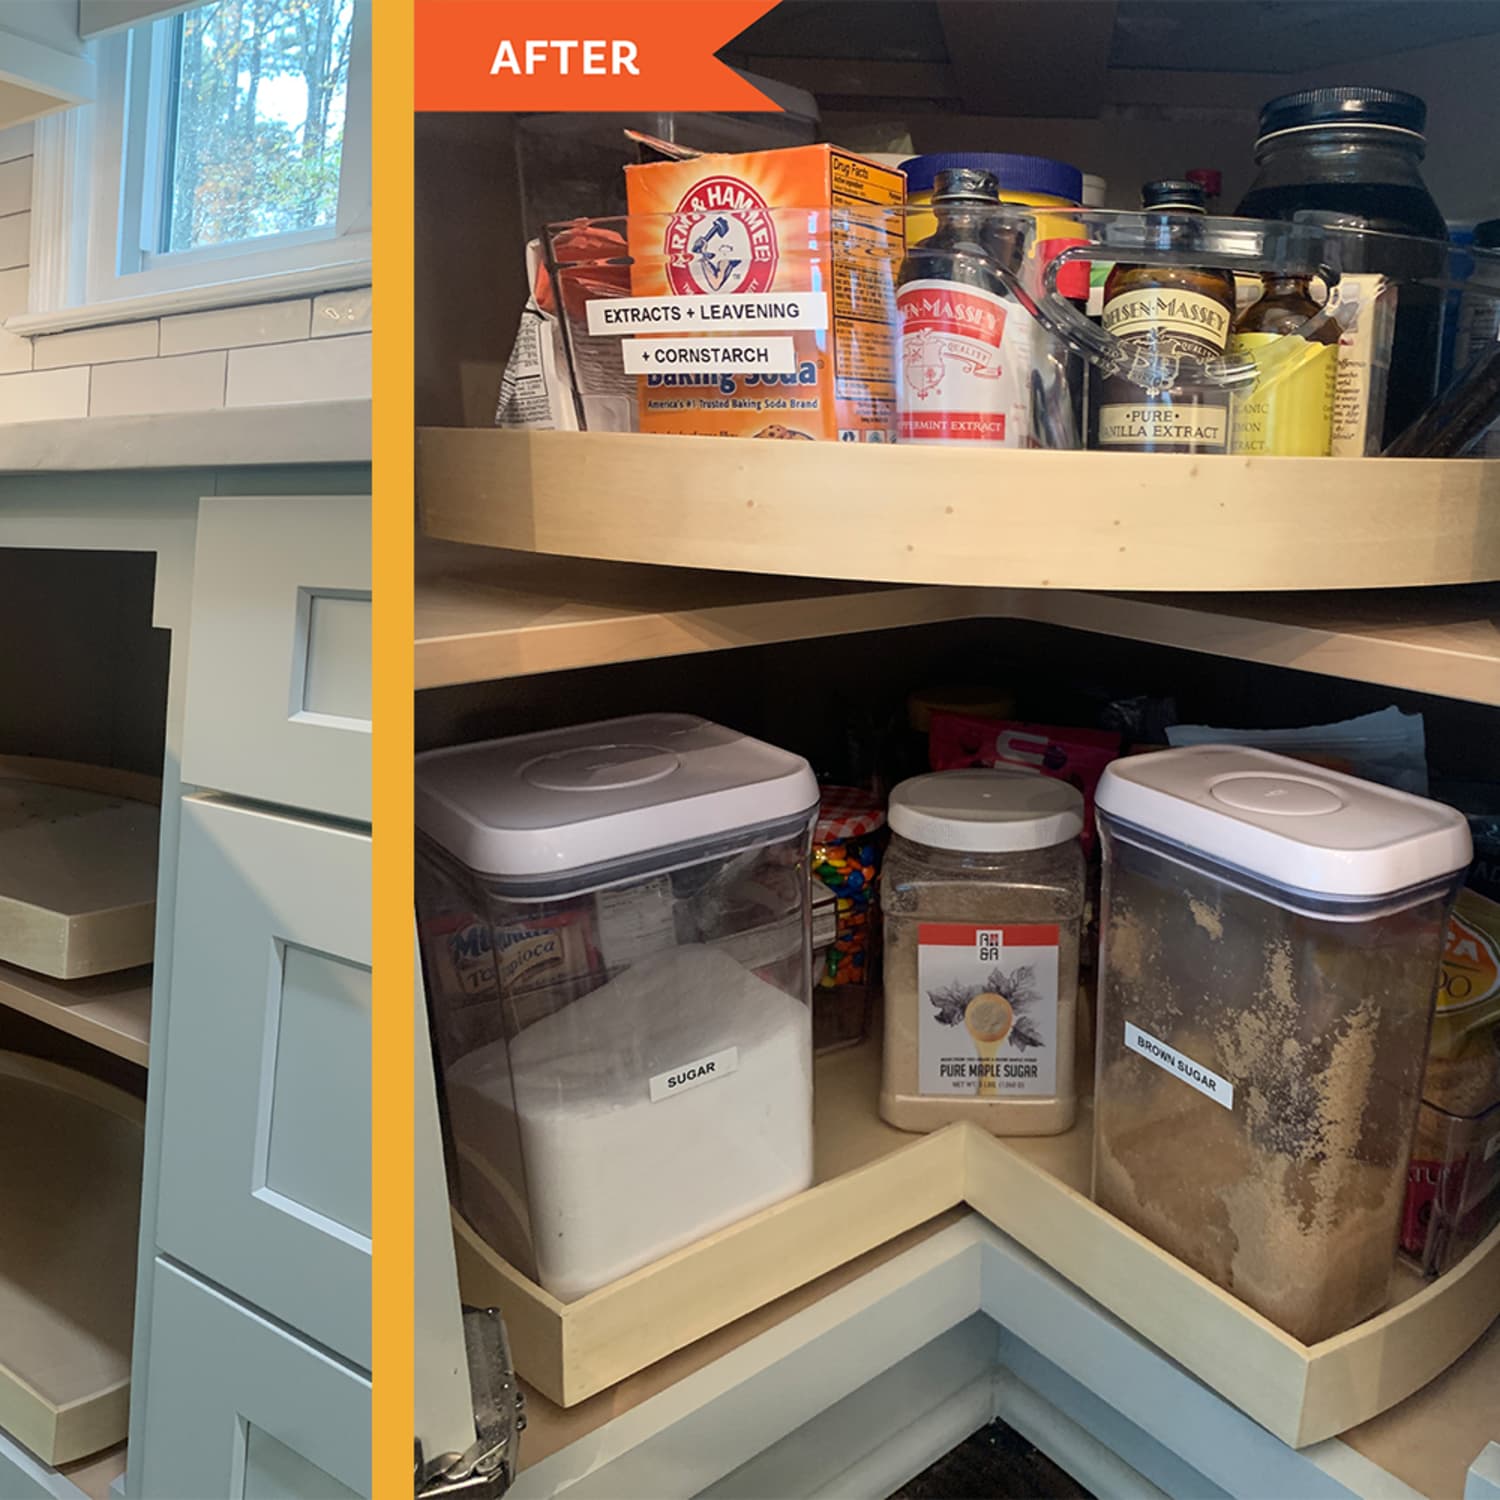 How to Organize a Corner Cabinet for Maximum Storage